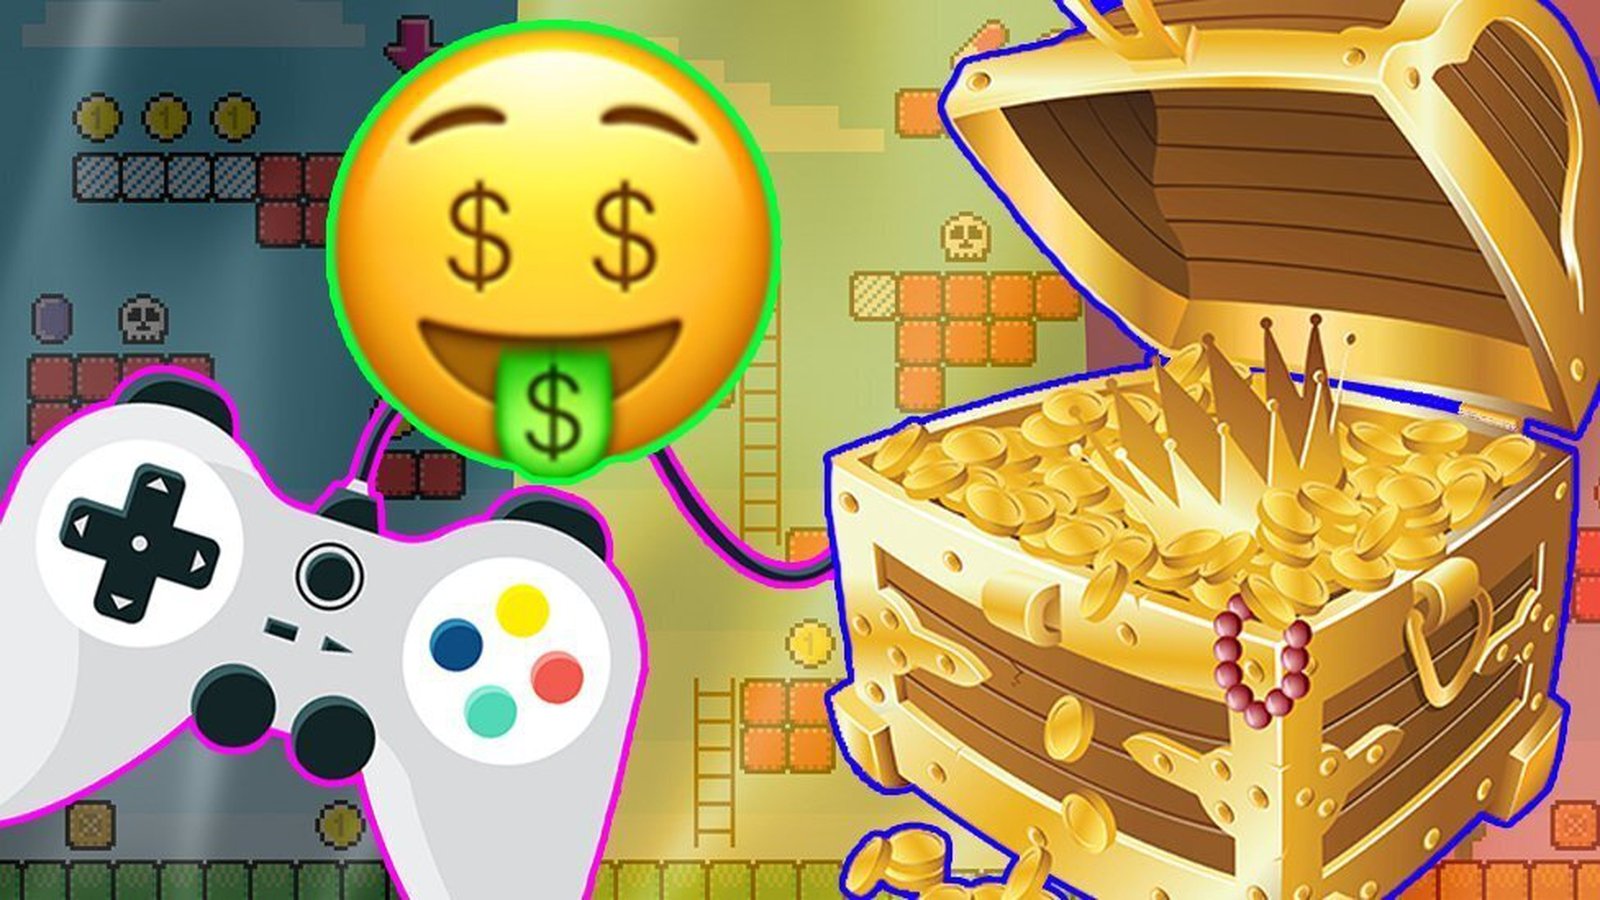 Microtransactions and Loot Boxes as an Element of Gambling